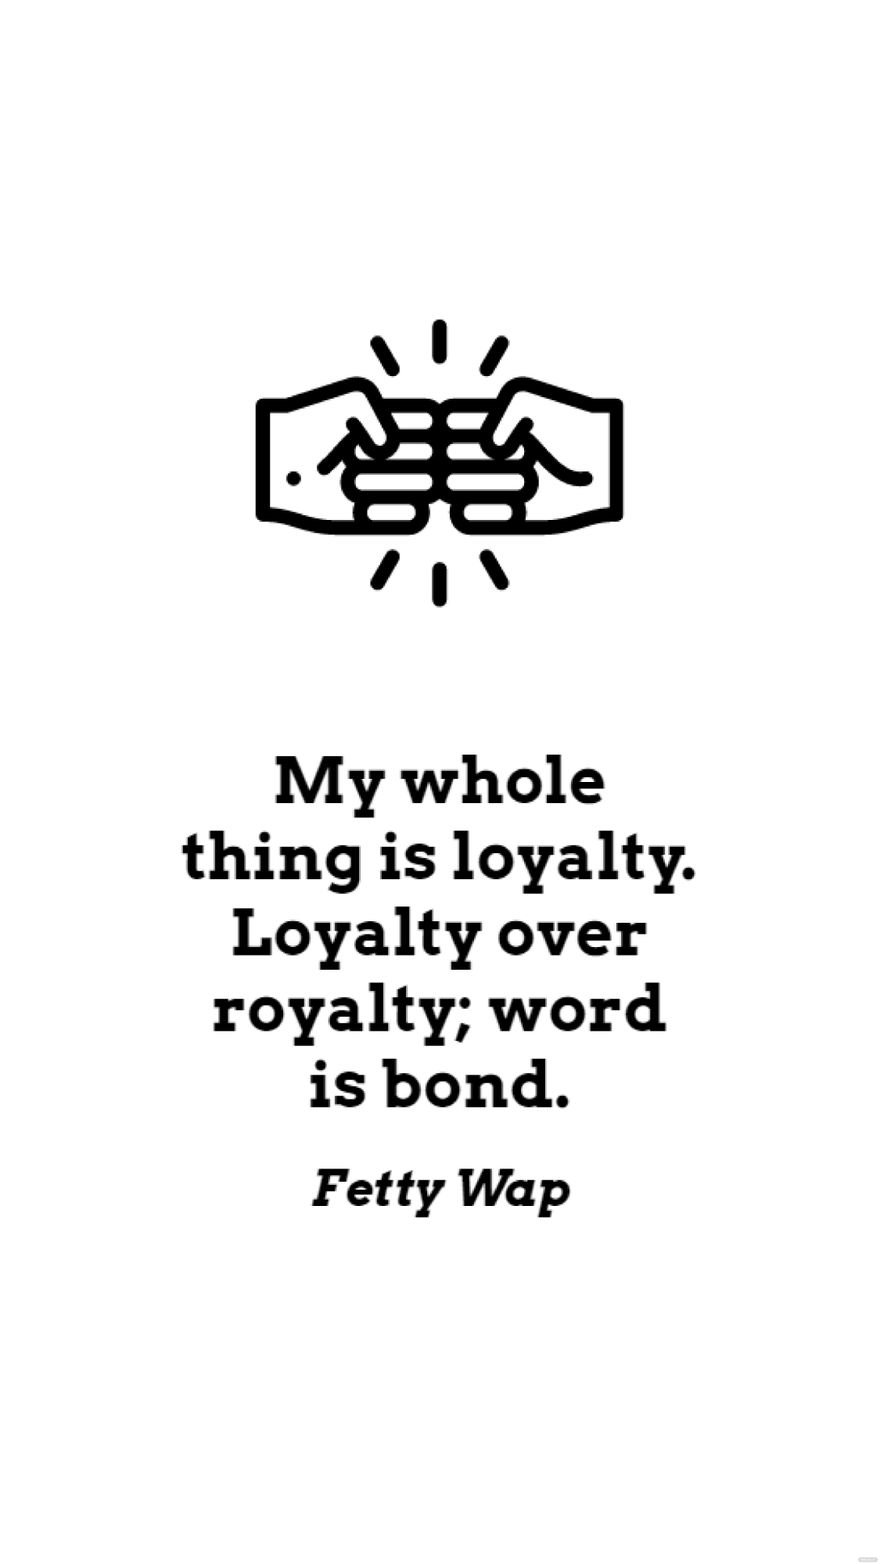 Free Fetty Wap - My whole thing is loyalty. Loyalty over royalty; word is bond. in JPG